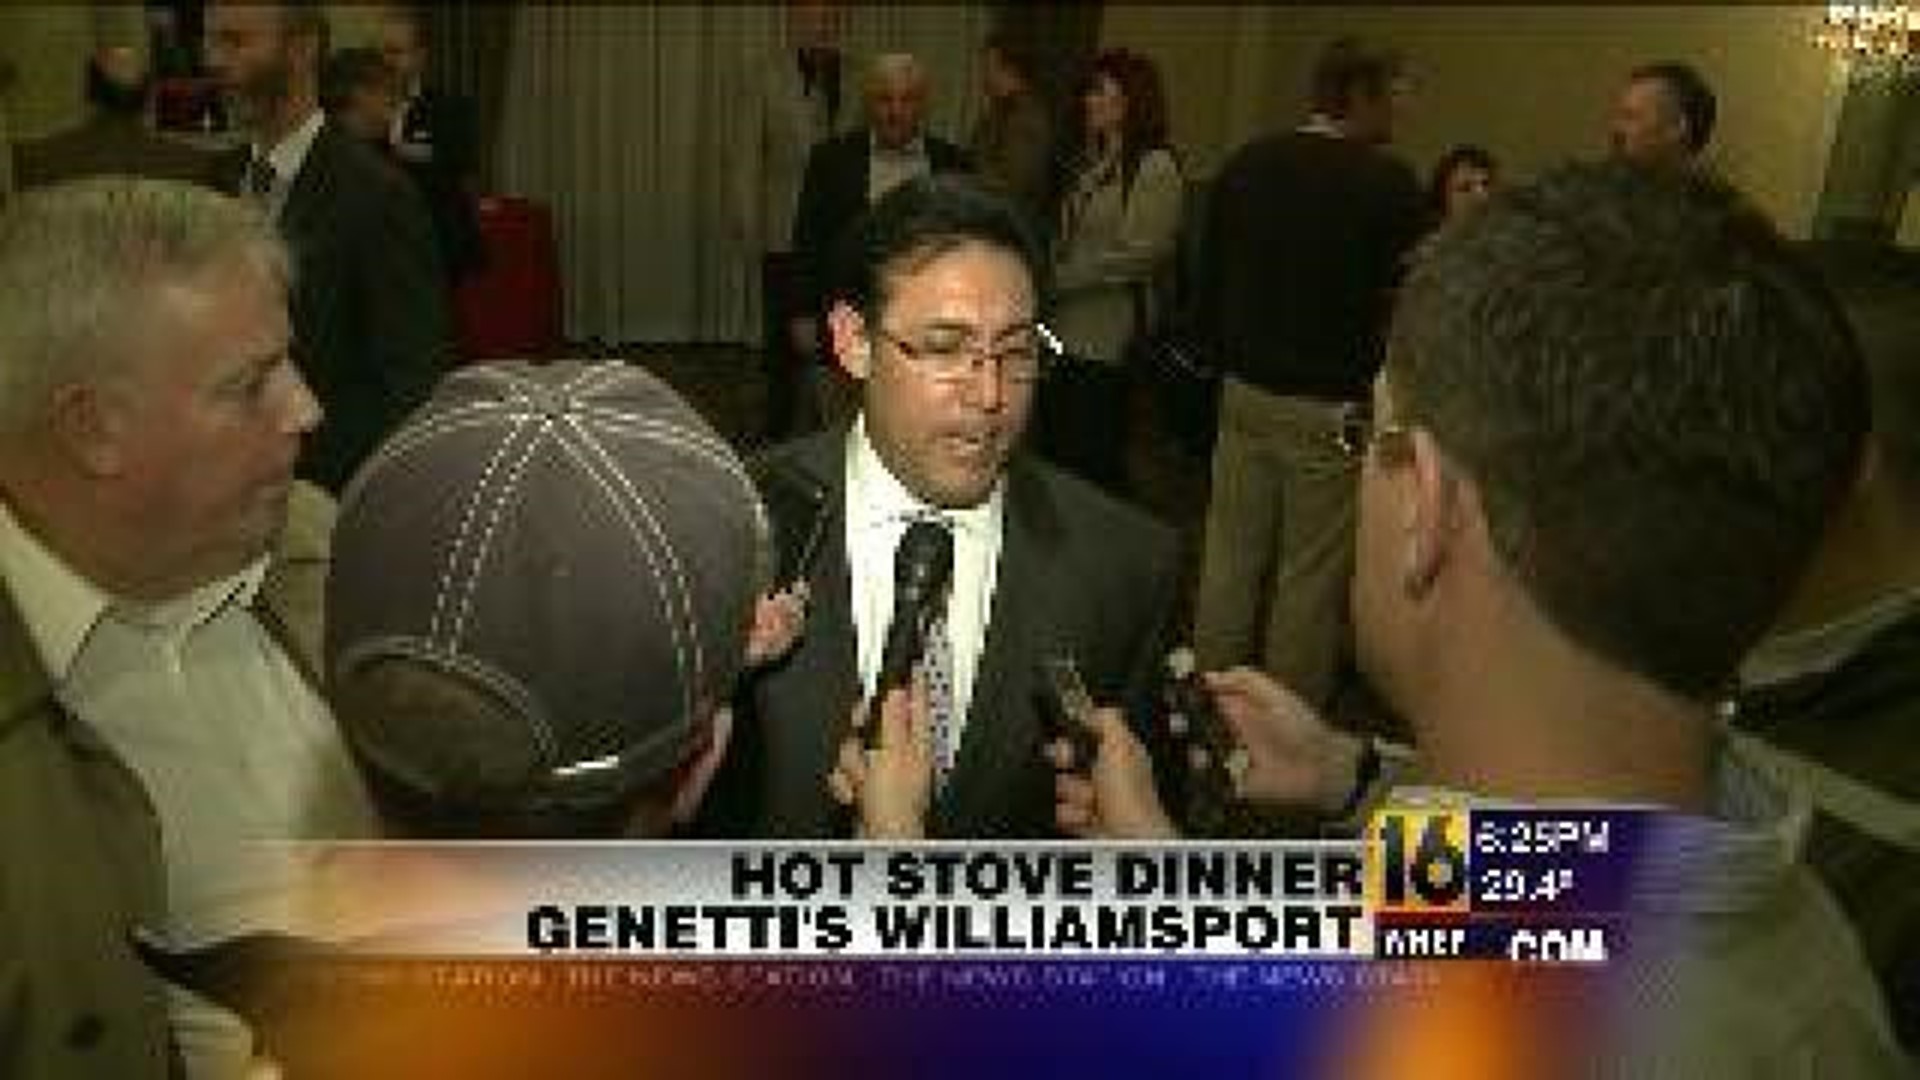 Hot Stove Dinner On Monday